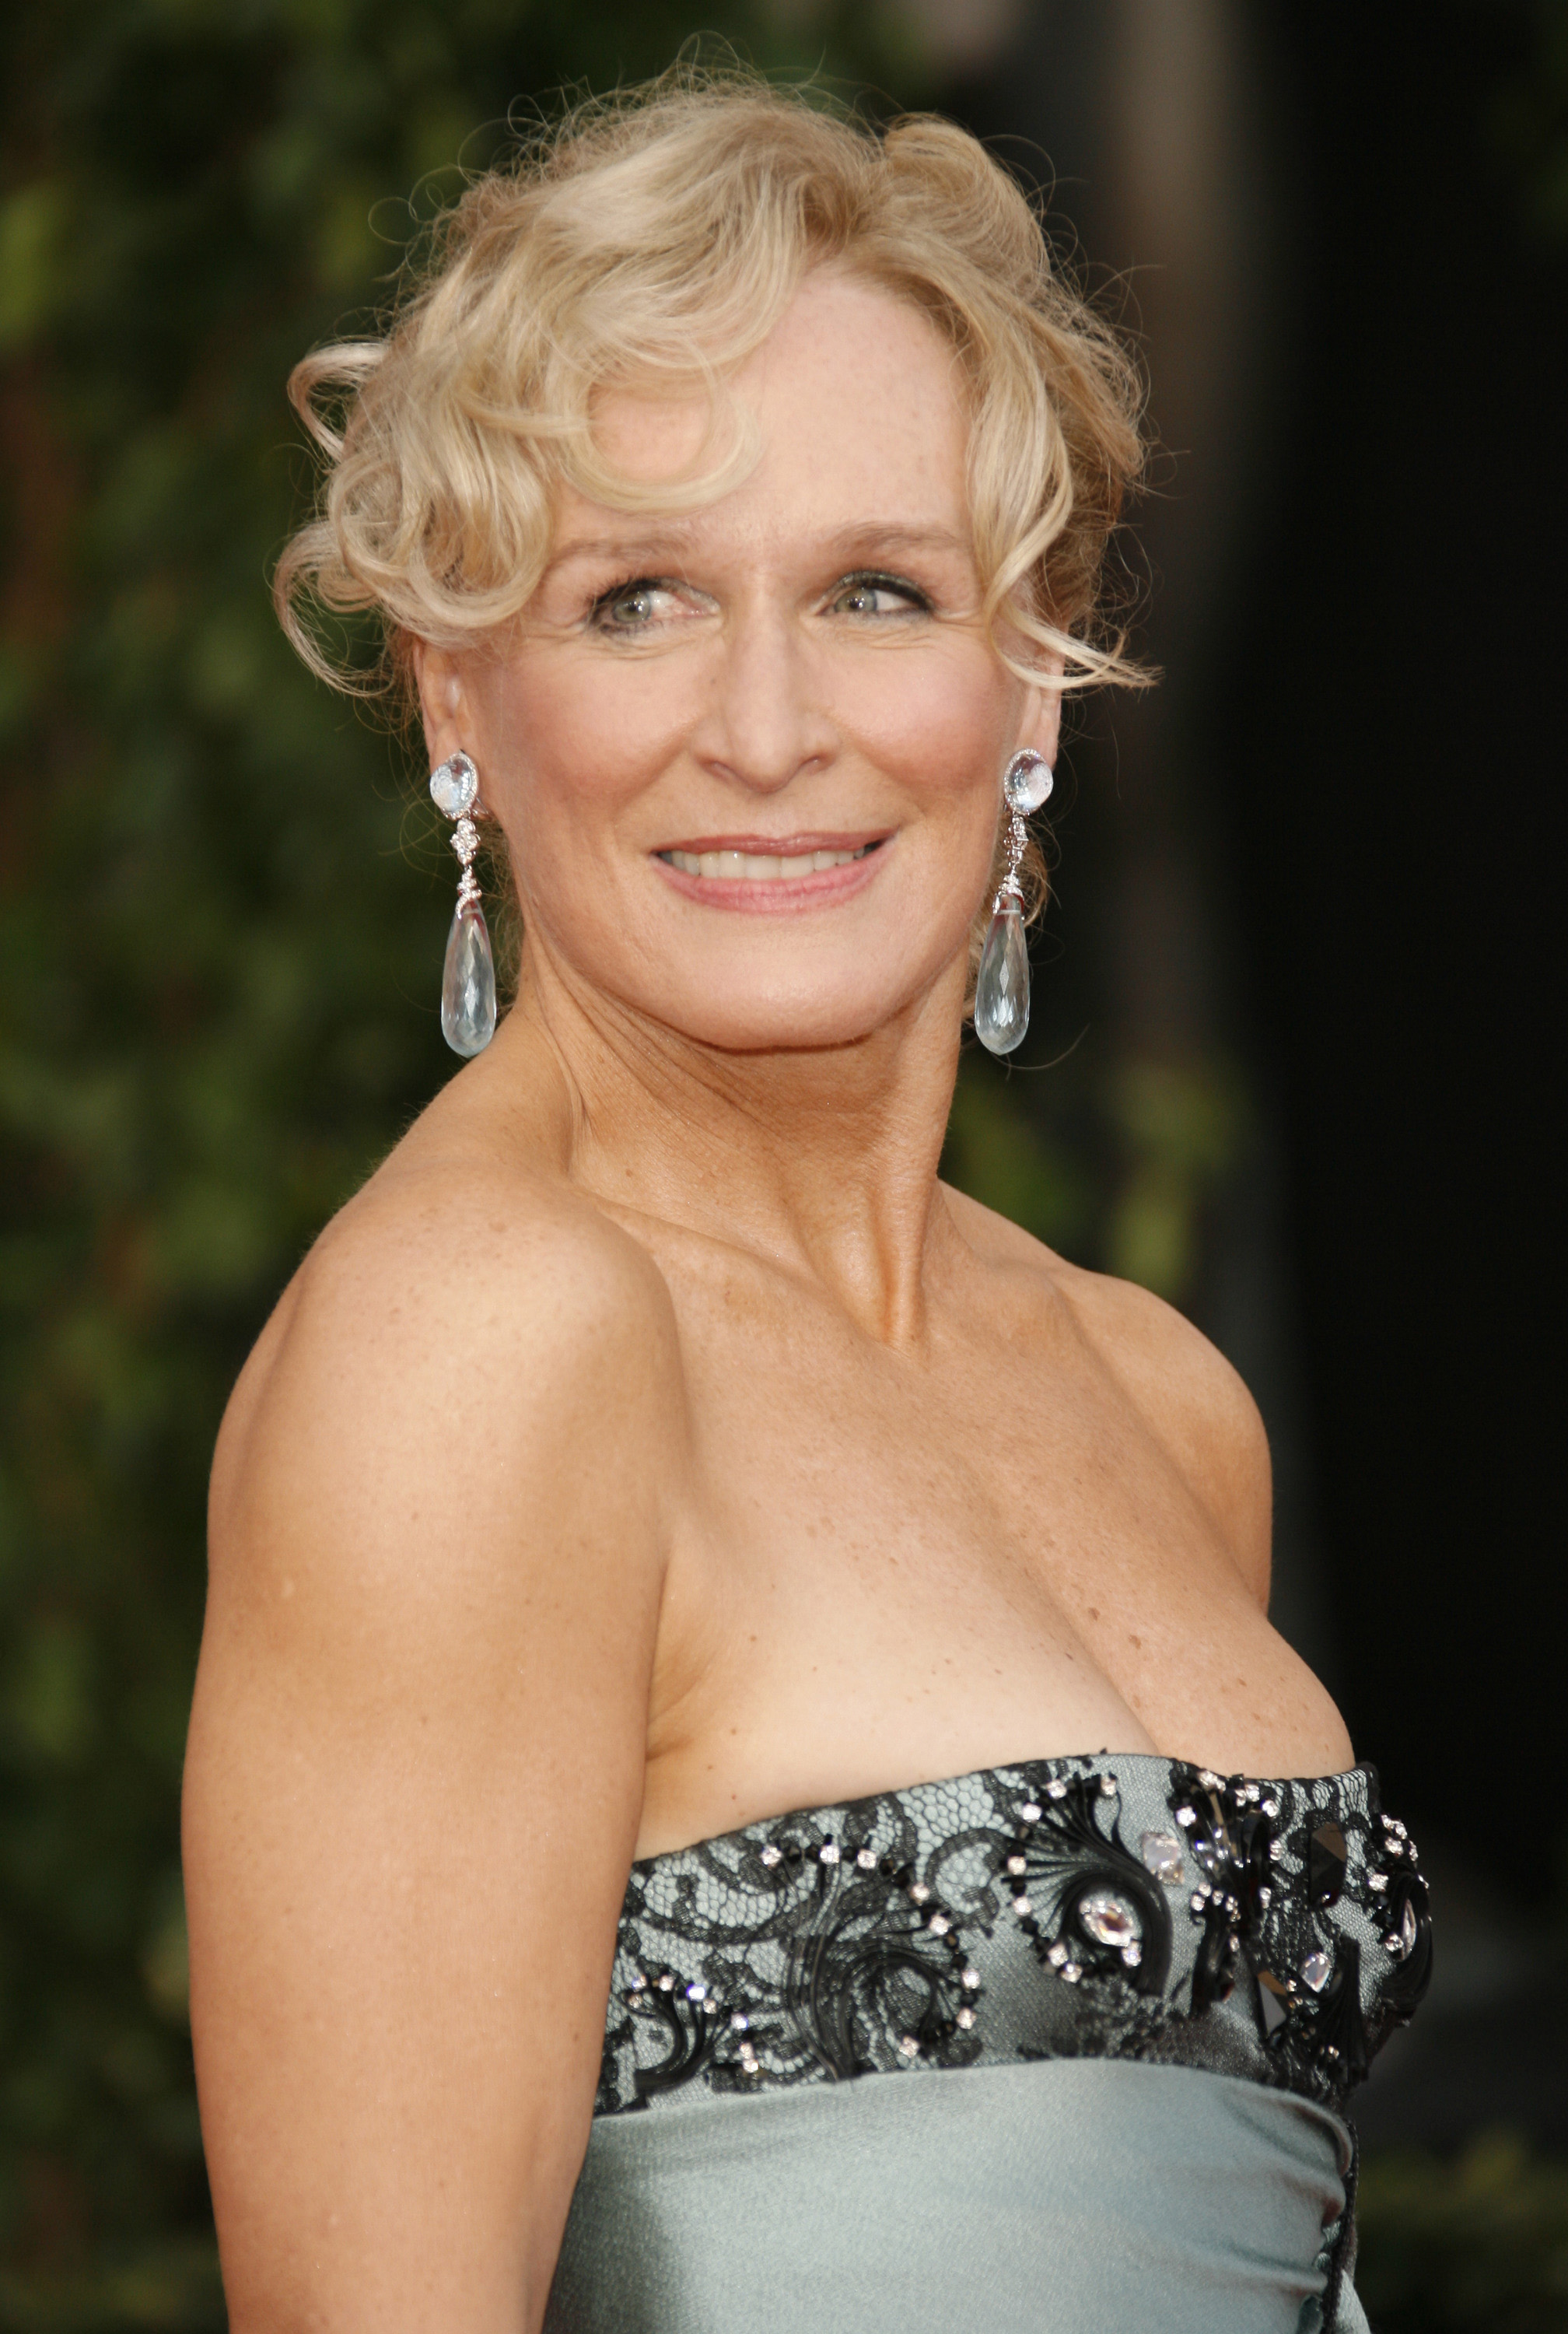 Glenn Close at the 14th Annual Screen Actors Guild Awards on January 27, 2008, in Los Angeles, California | Source: Getty Images